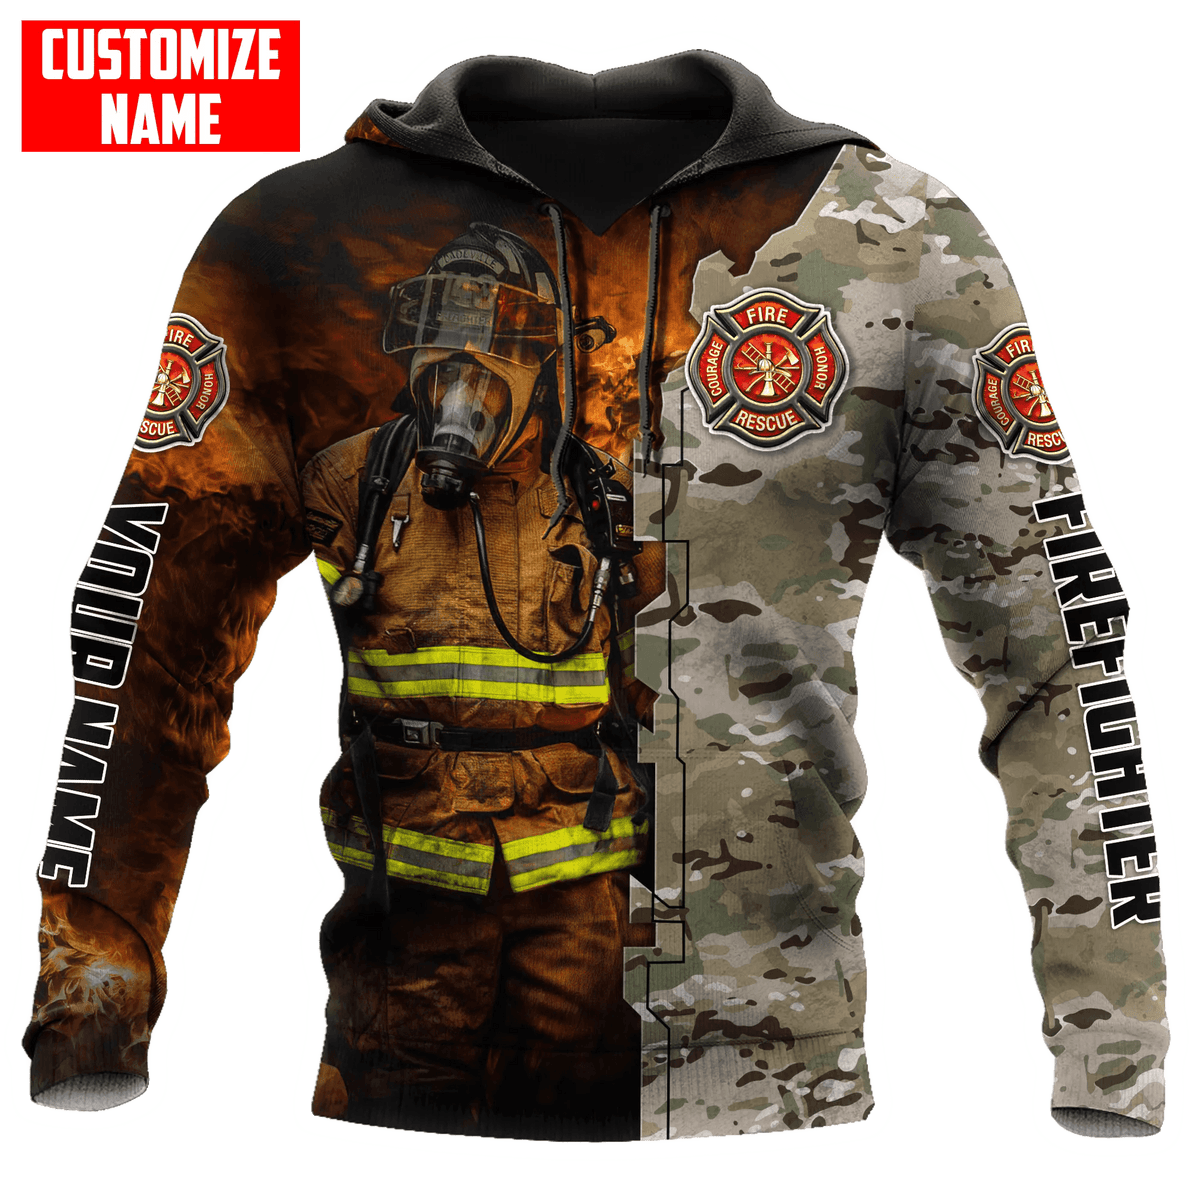 Customized With Your Name - Camo Fireman In Action Firefighter Sublimated Hoodie, Zip-Up or Sweatshirt - Salty Medic Clothing Co.